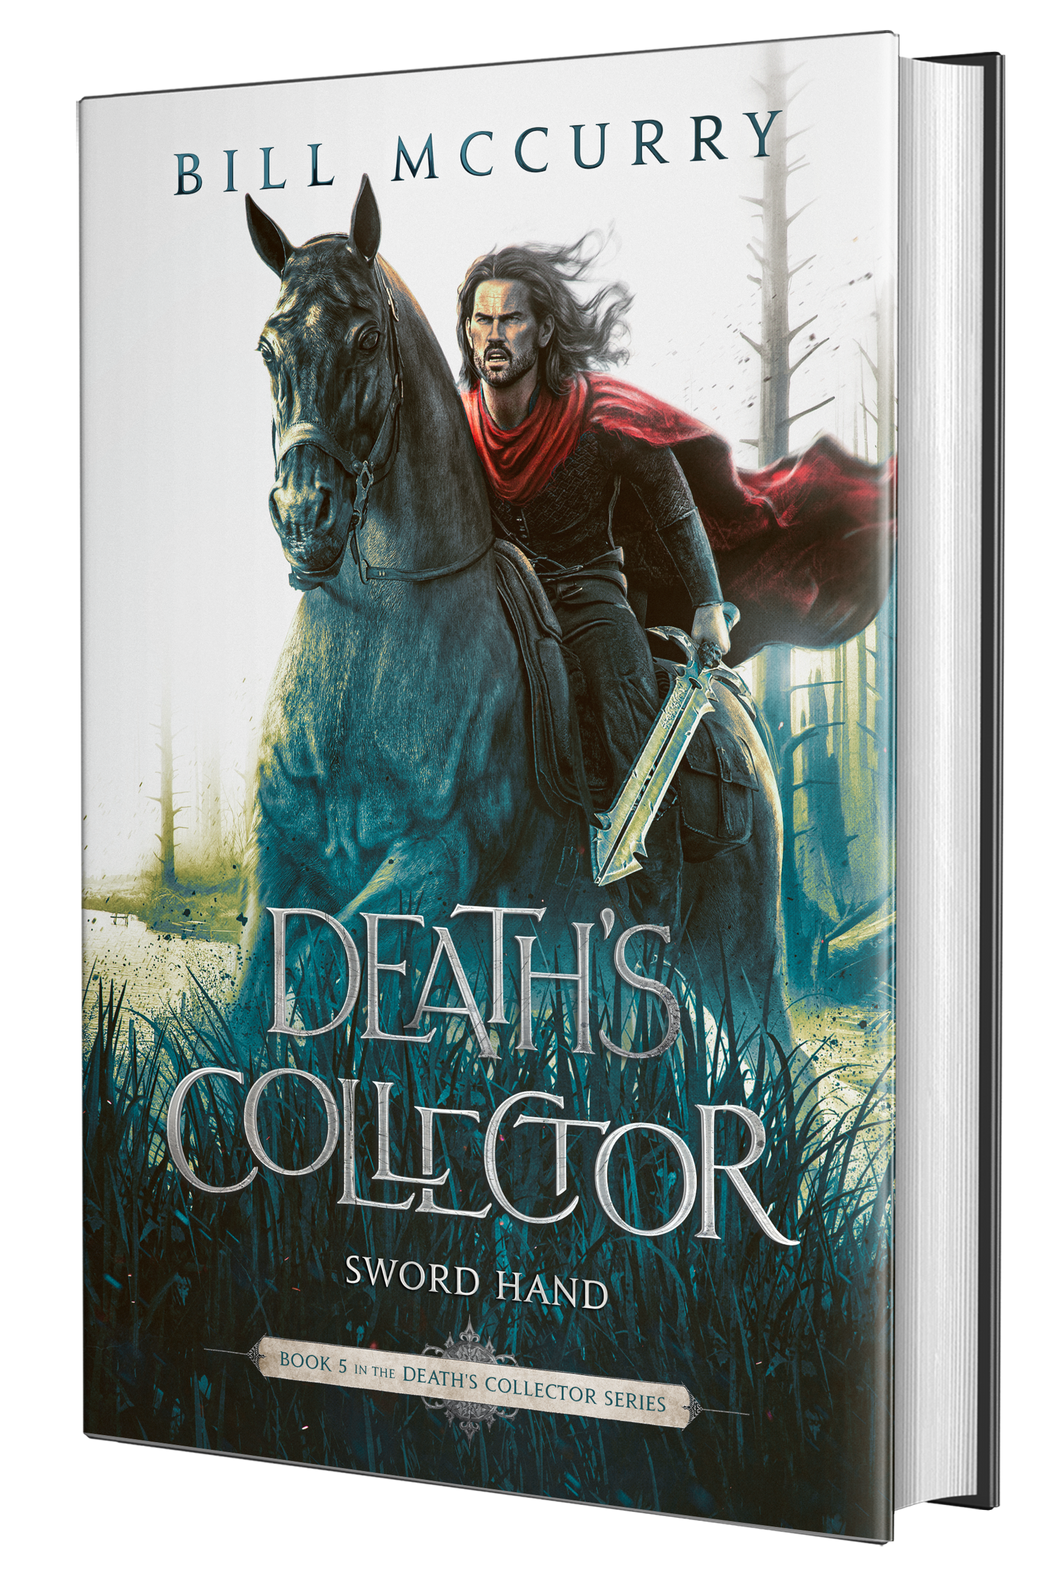 Death's Collector: Sword Hand 2nd Edition (paperback)